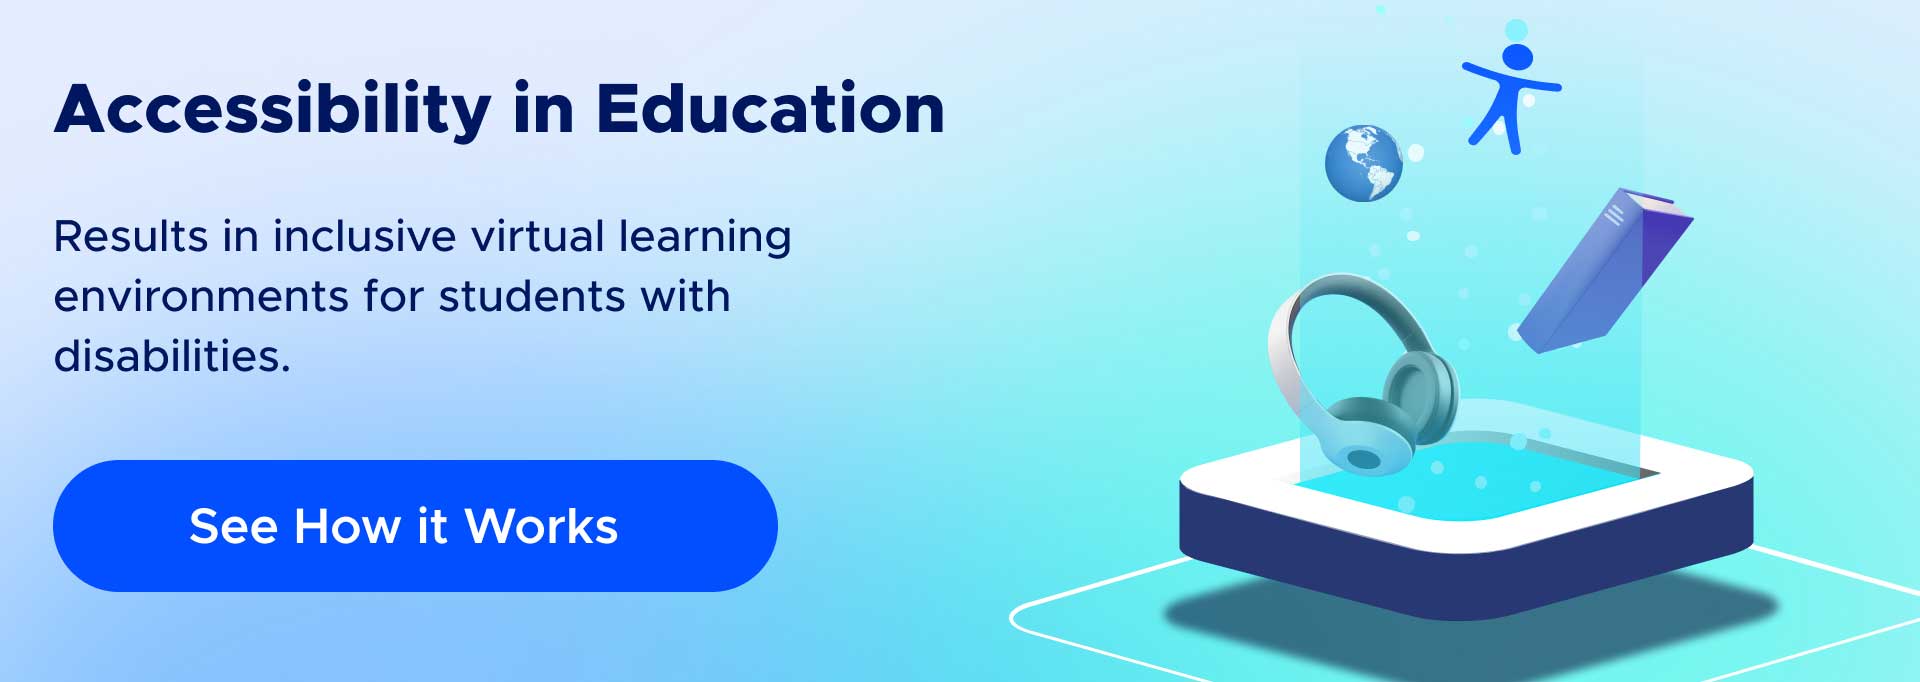 Accessibility in education banner